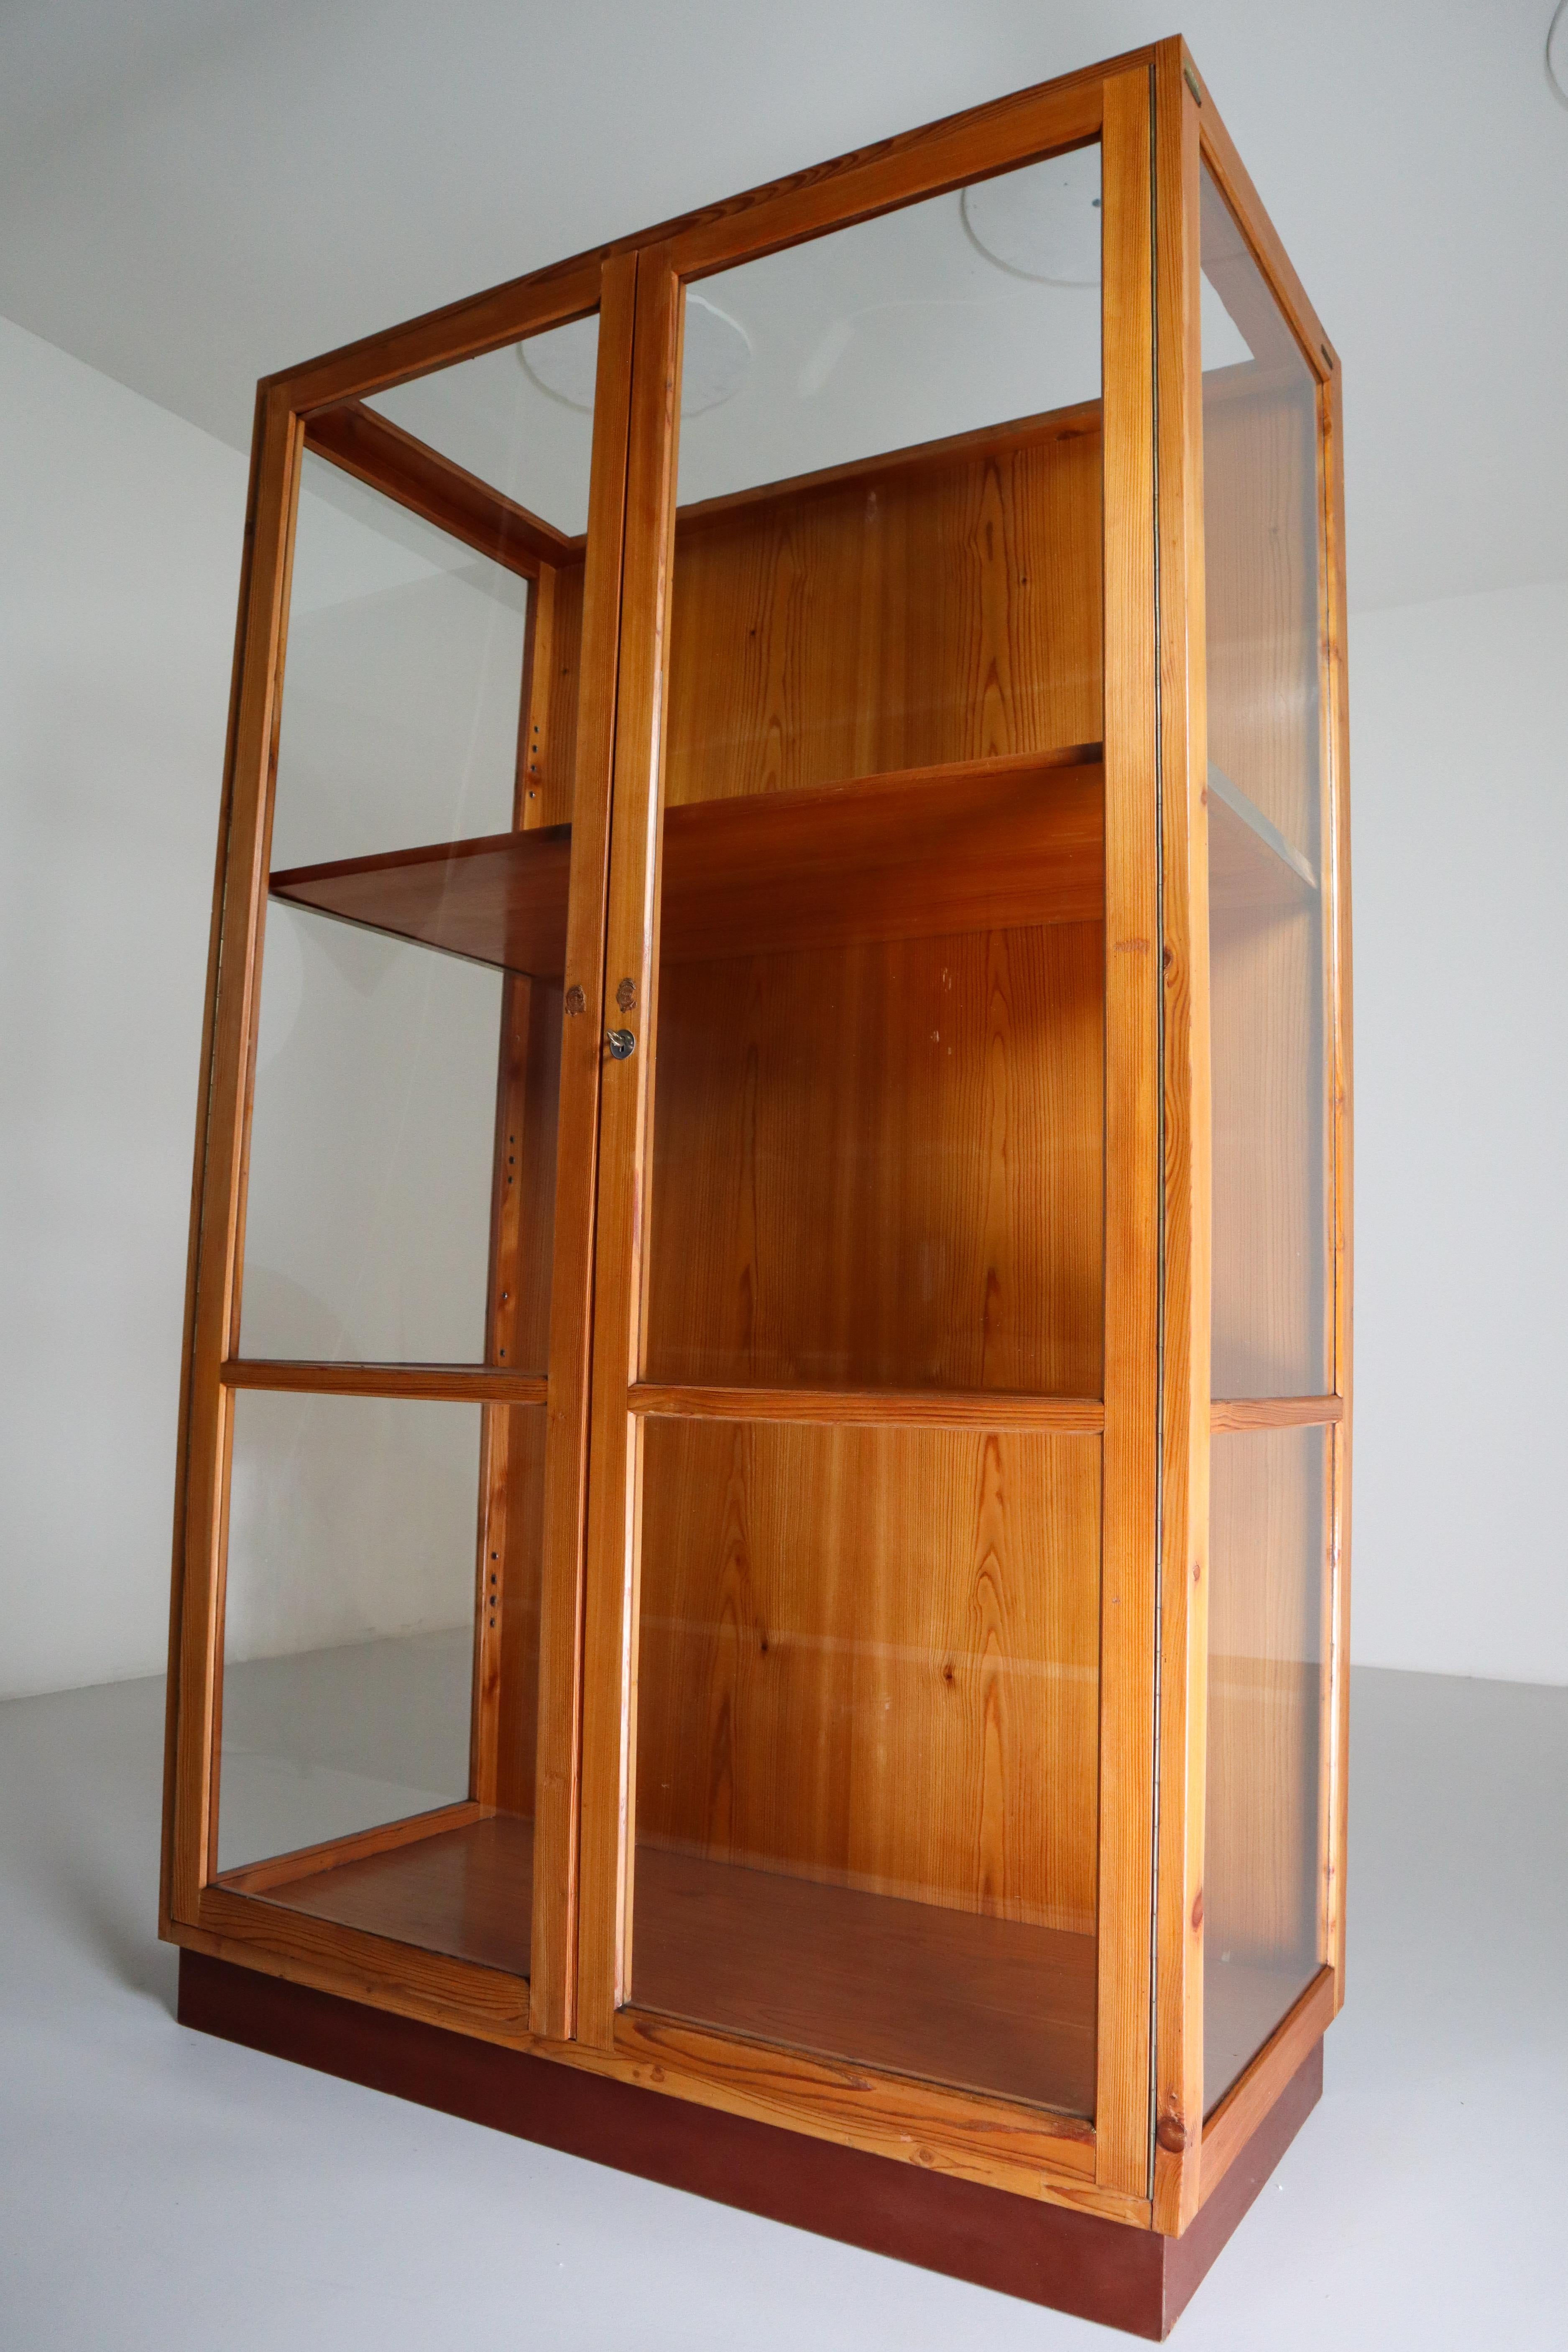 Twelve Glazed Display Cabinets from The National Museum in Praque, 1950s (Mitte des 20. Jahrhunderts)